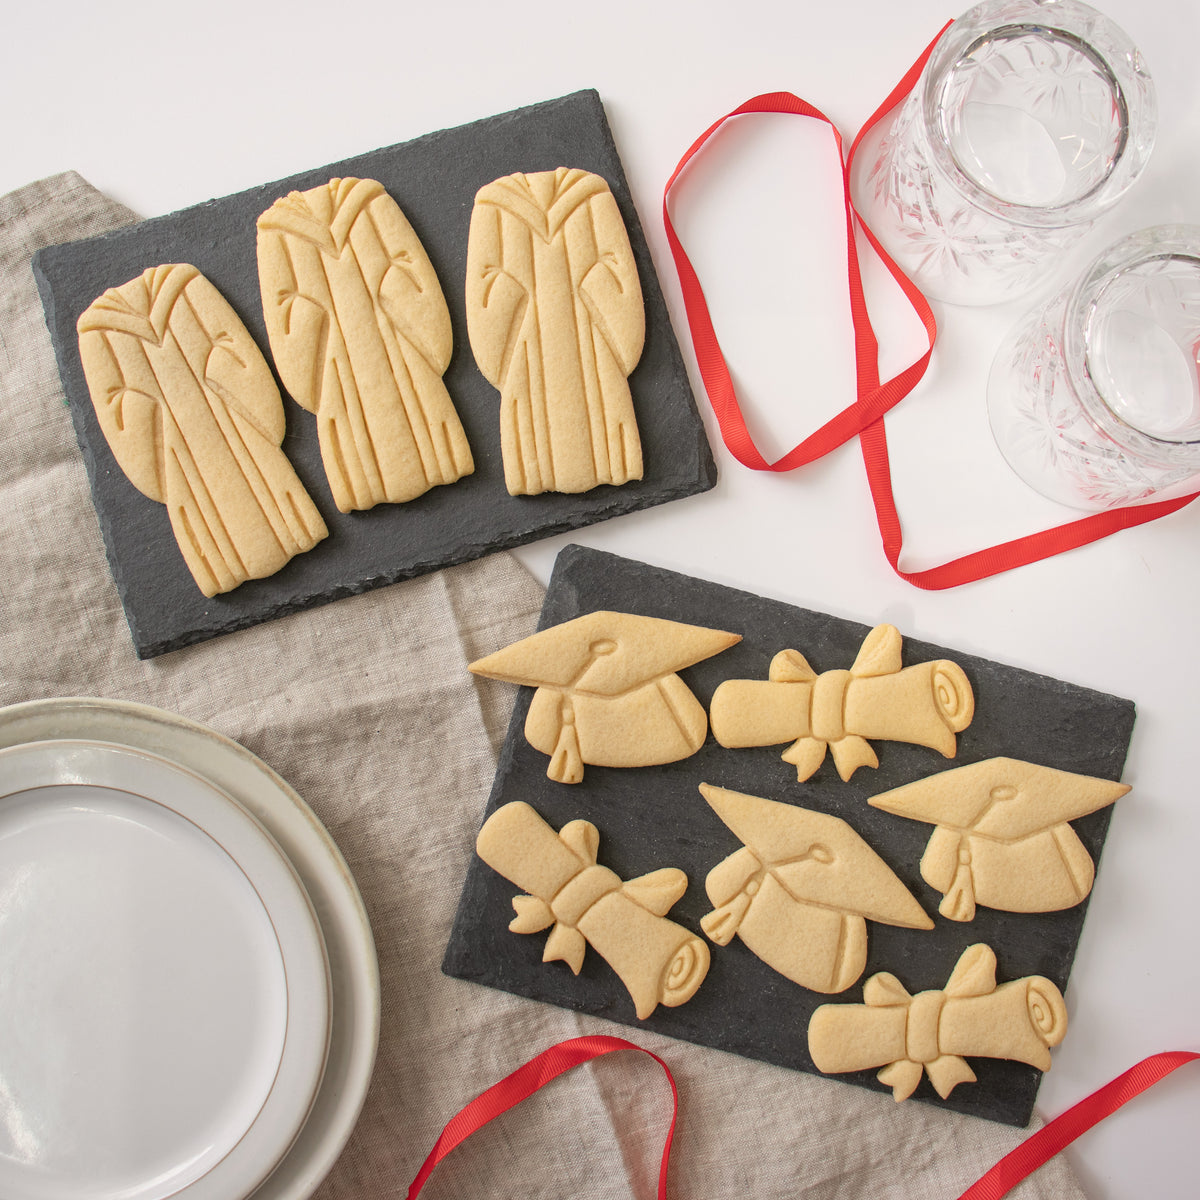 set of 3 graduation themed cookies, featuring a graduation gown, a graduate cap and a scroll